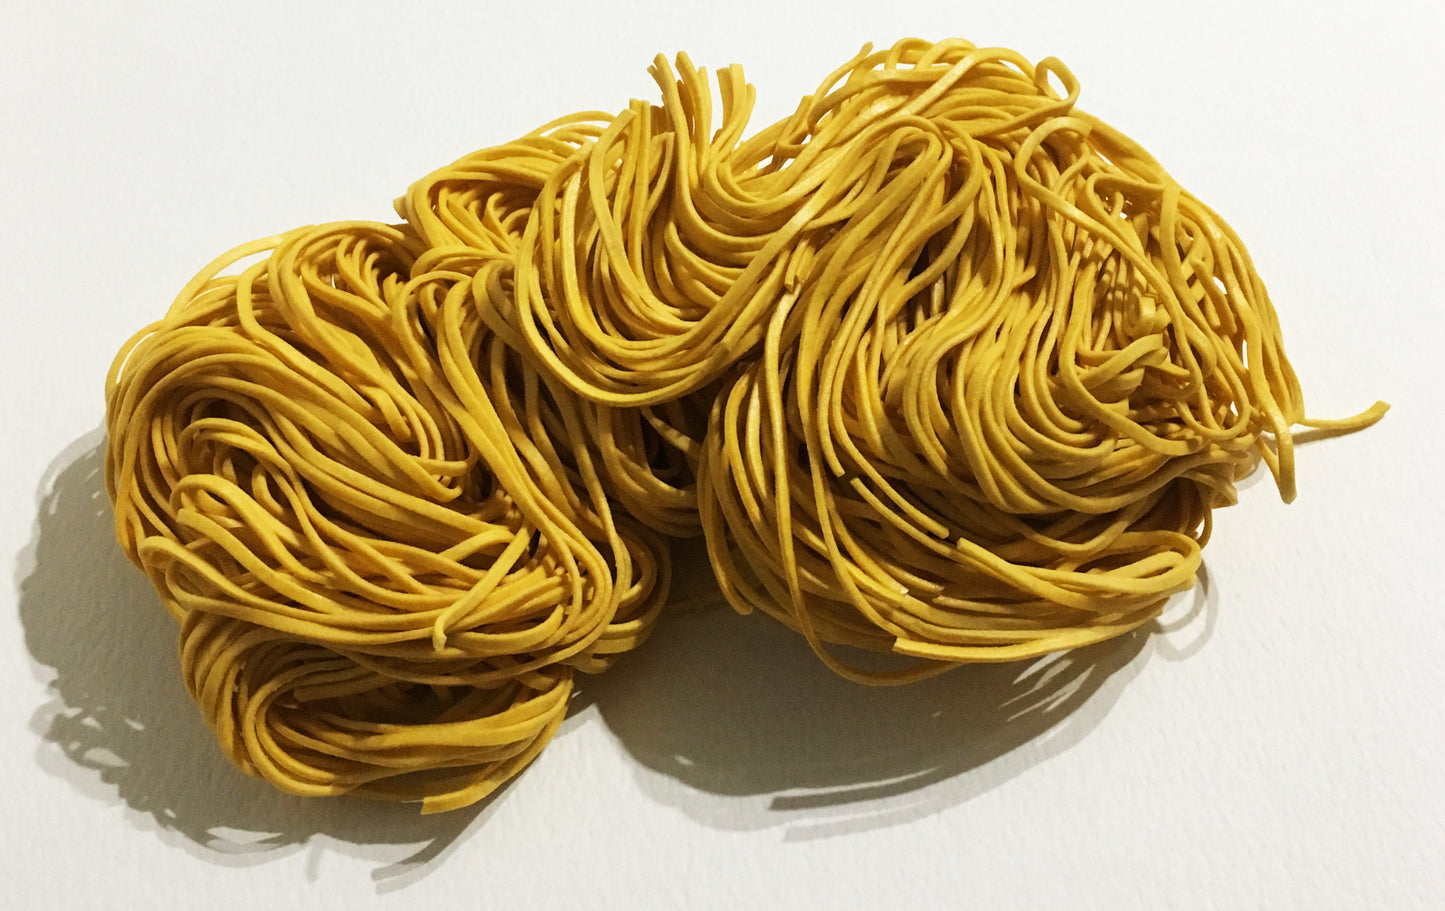 Yau's Thick Chow Mein Noodles 300g